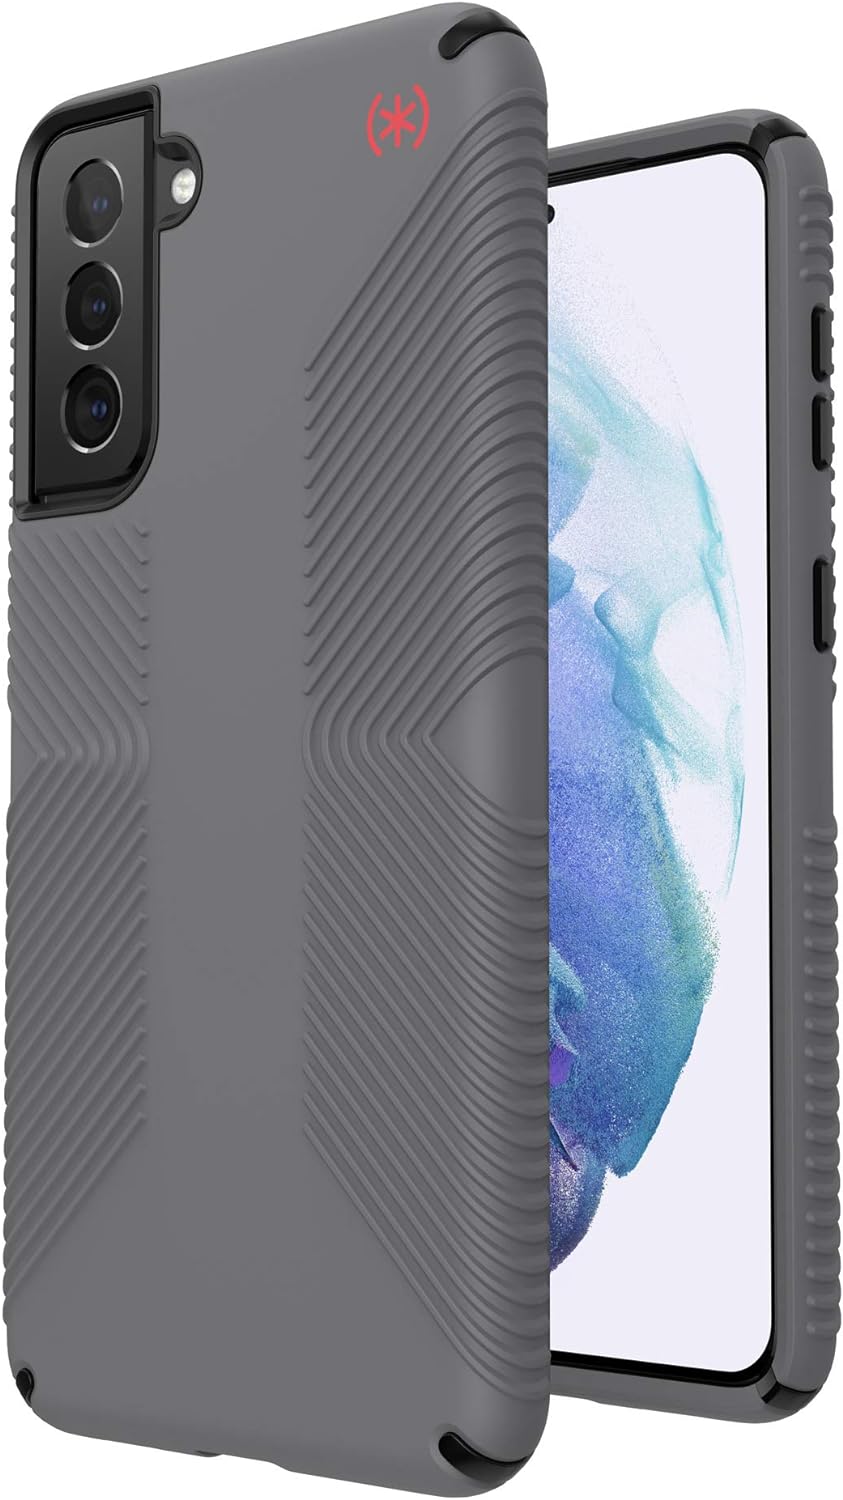 Speck Presidio2 Grip Case for Samsung Galaxy S21 Plus 5G with 13ft Drop Protection - Grey/Black